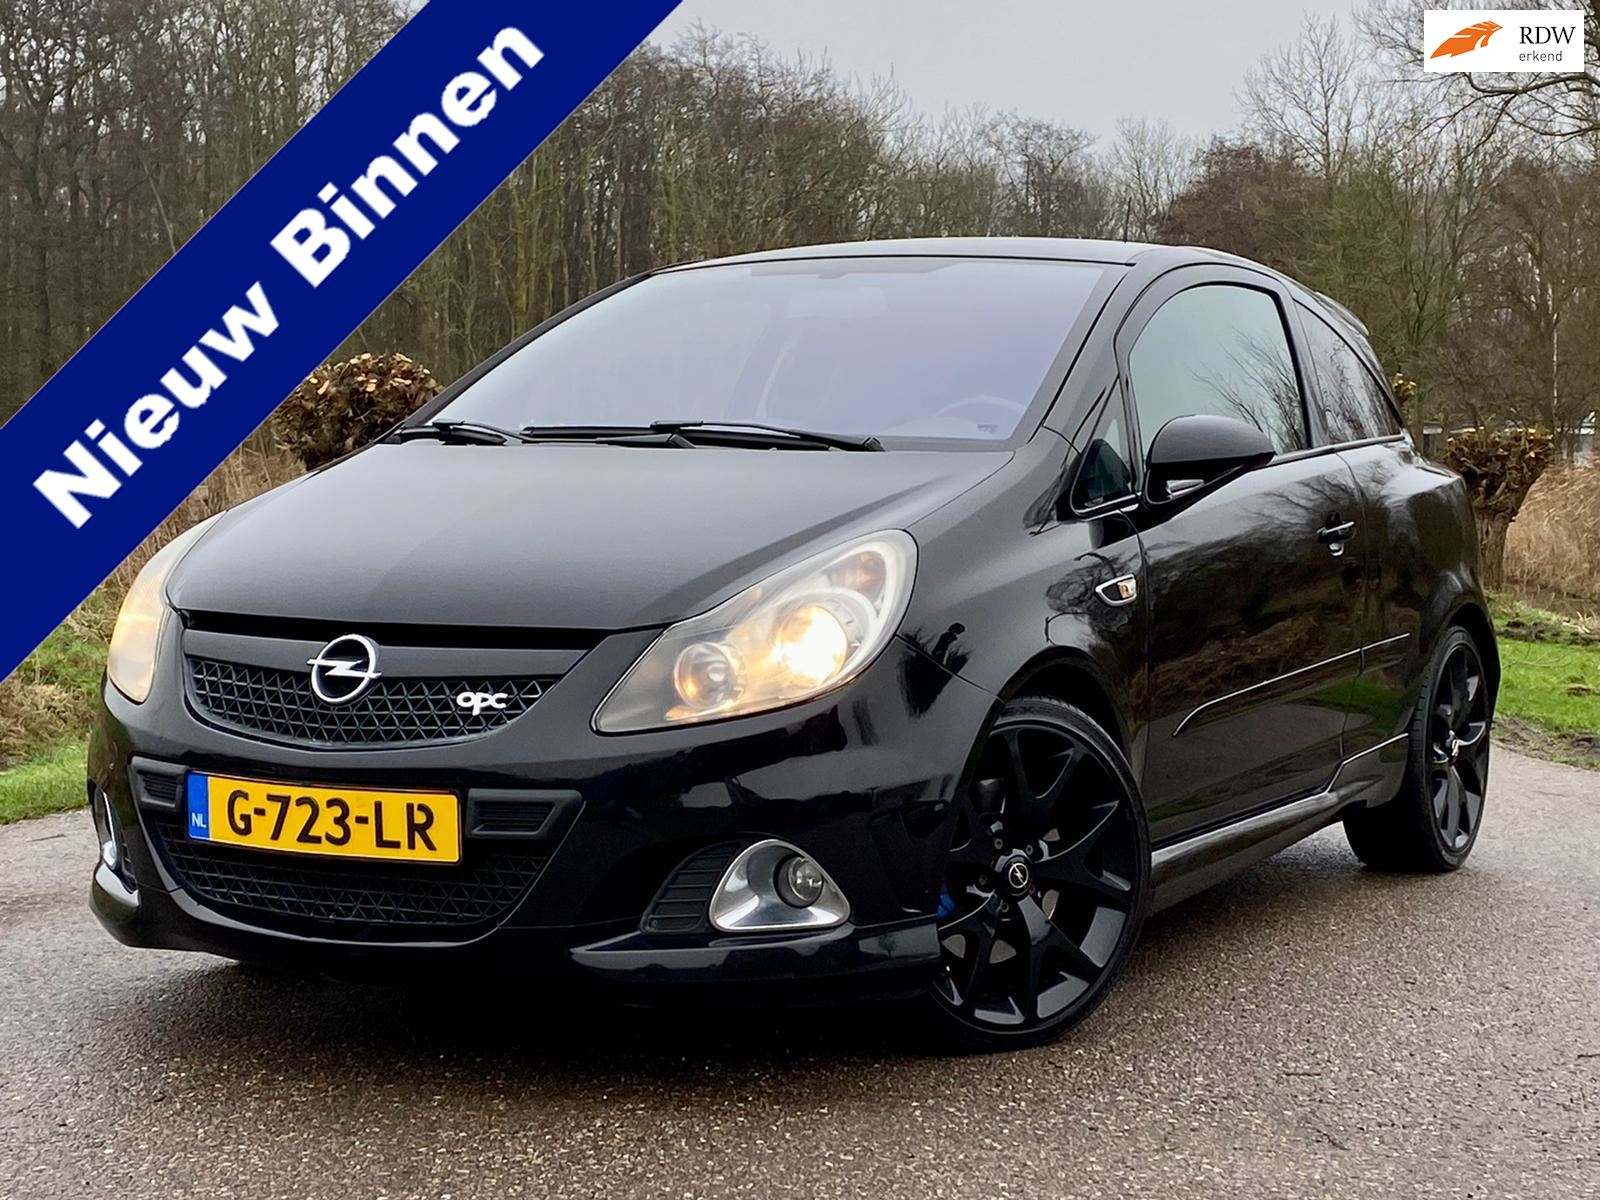 Opel Corsa occasion - Favoriet Occasions